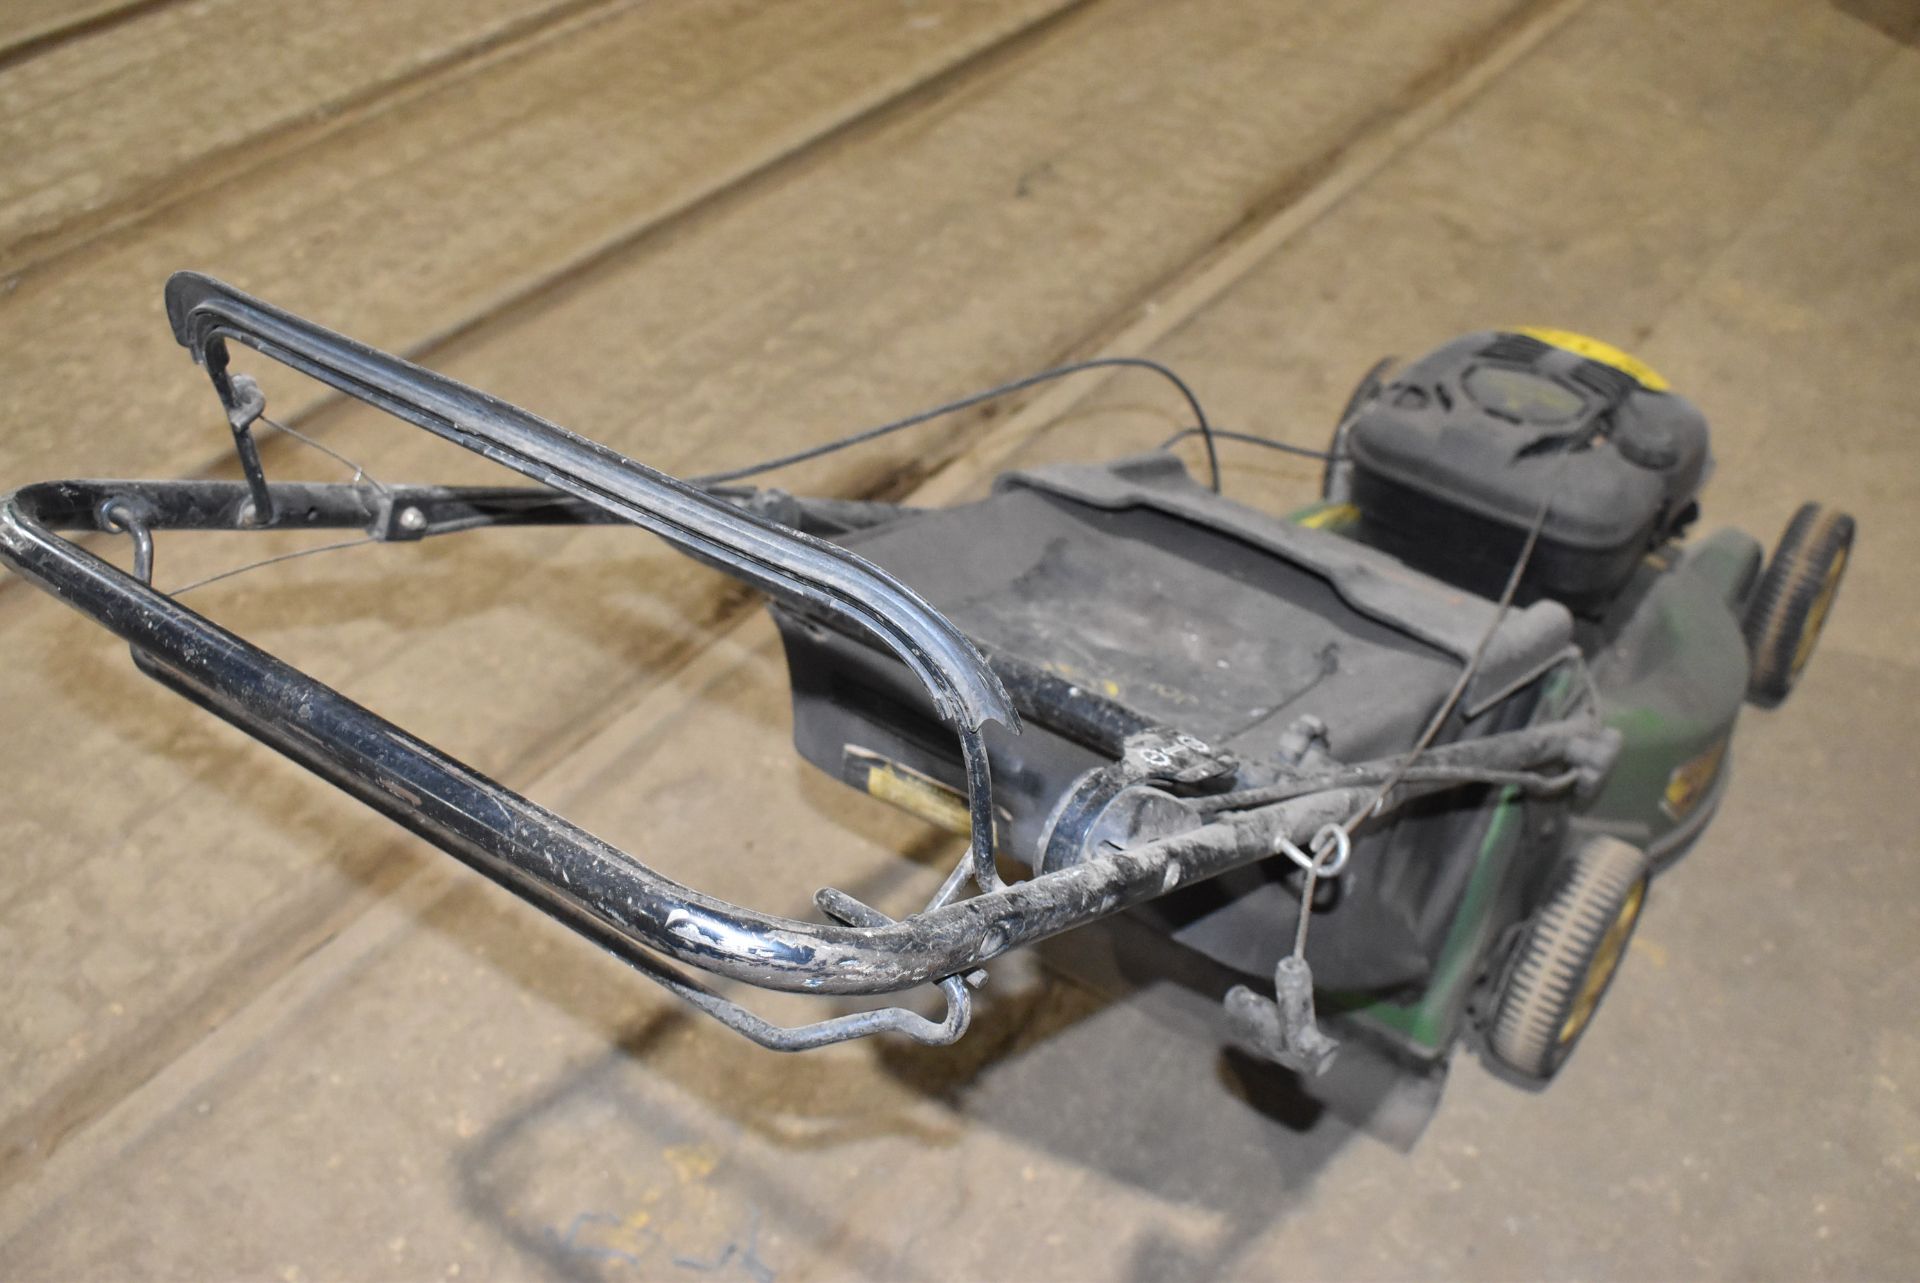 JOHN DEERE GAS POWERED LAWN MOWER [RIGGING FEES FOR LOT #1757 - $30 USD PLUS APPLICABLE TAXES] - Image 5 of 5